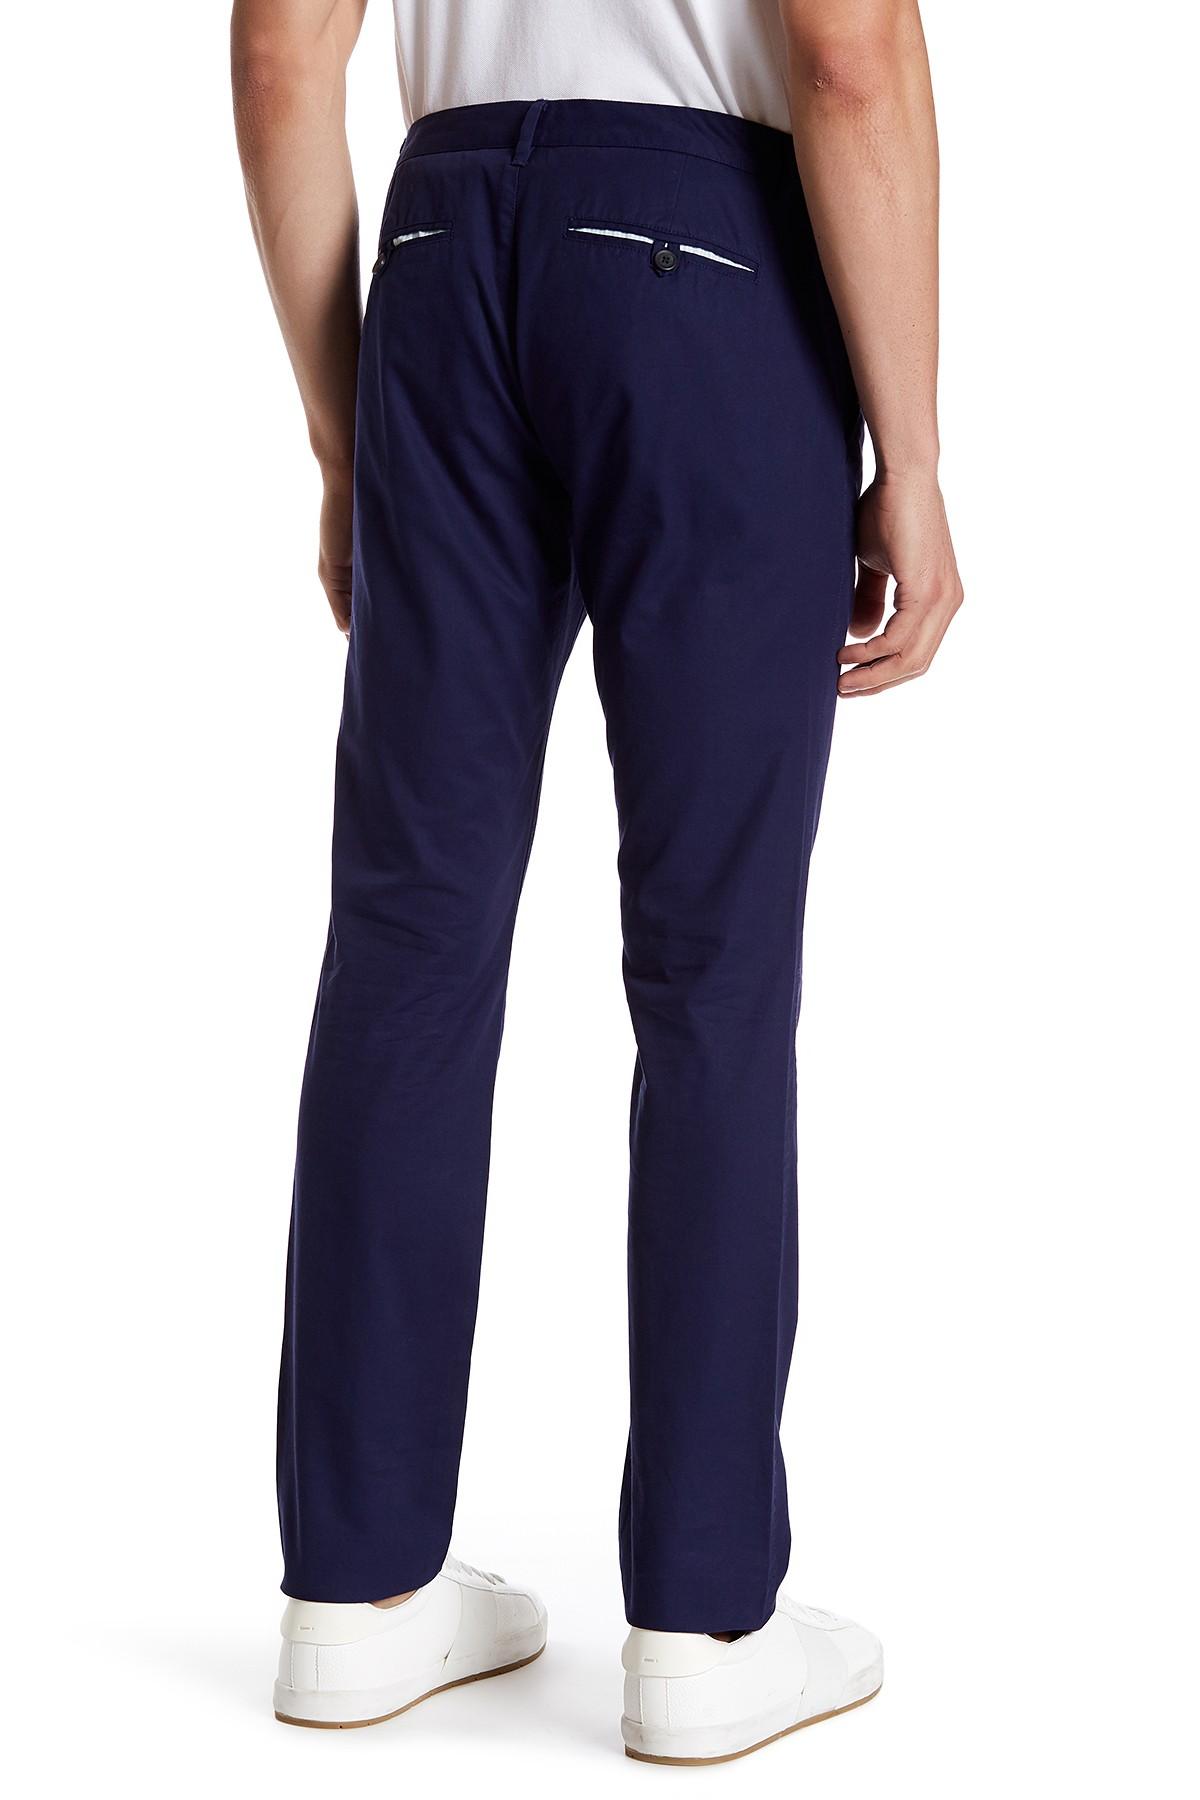 Lyst - Bonobos Tailored Summer Weight Chino Pant in Blue for Men